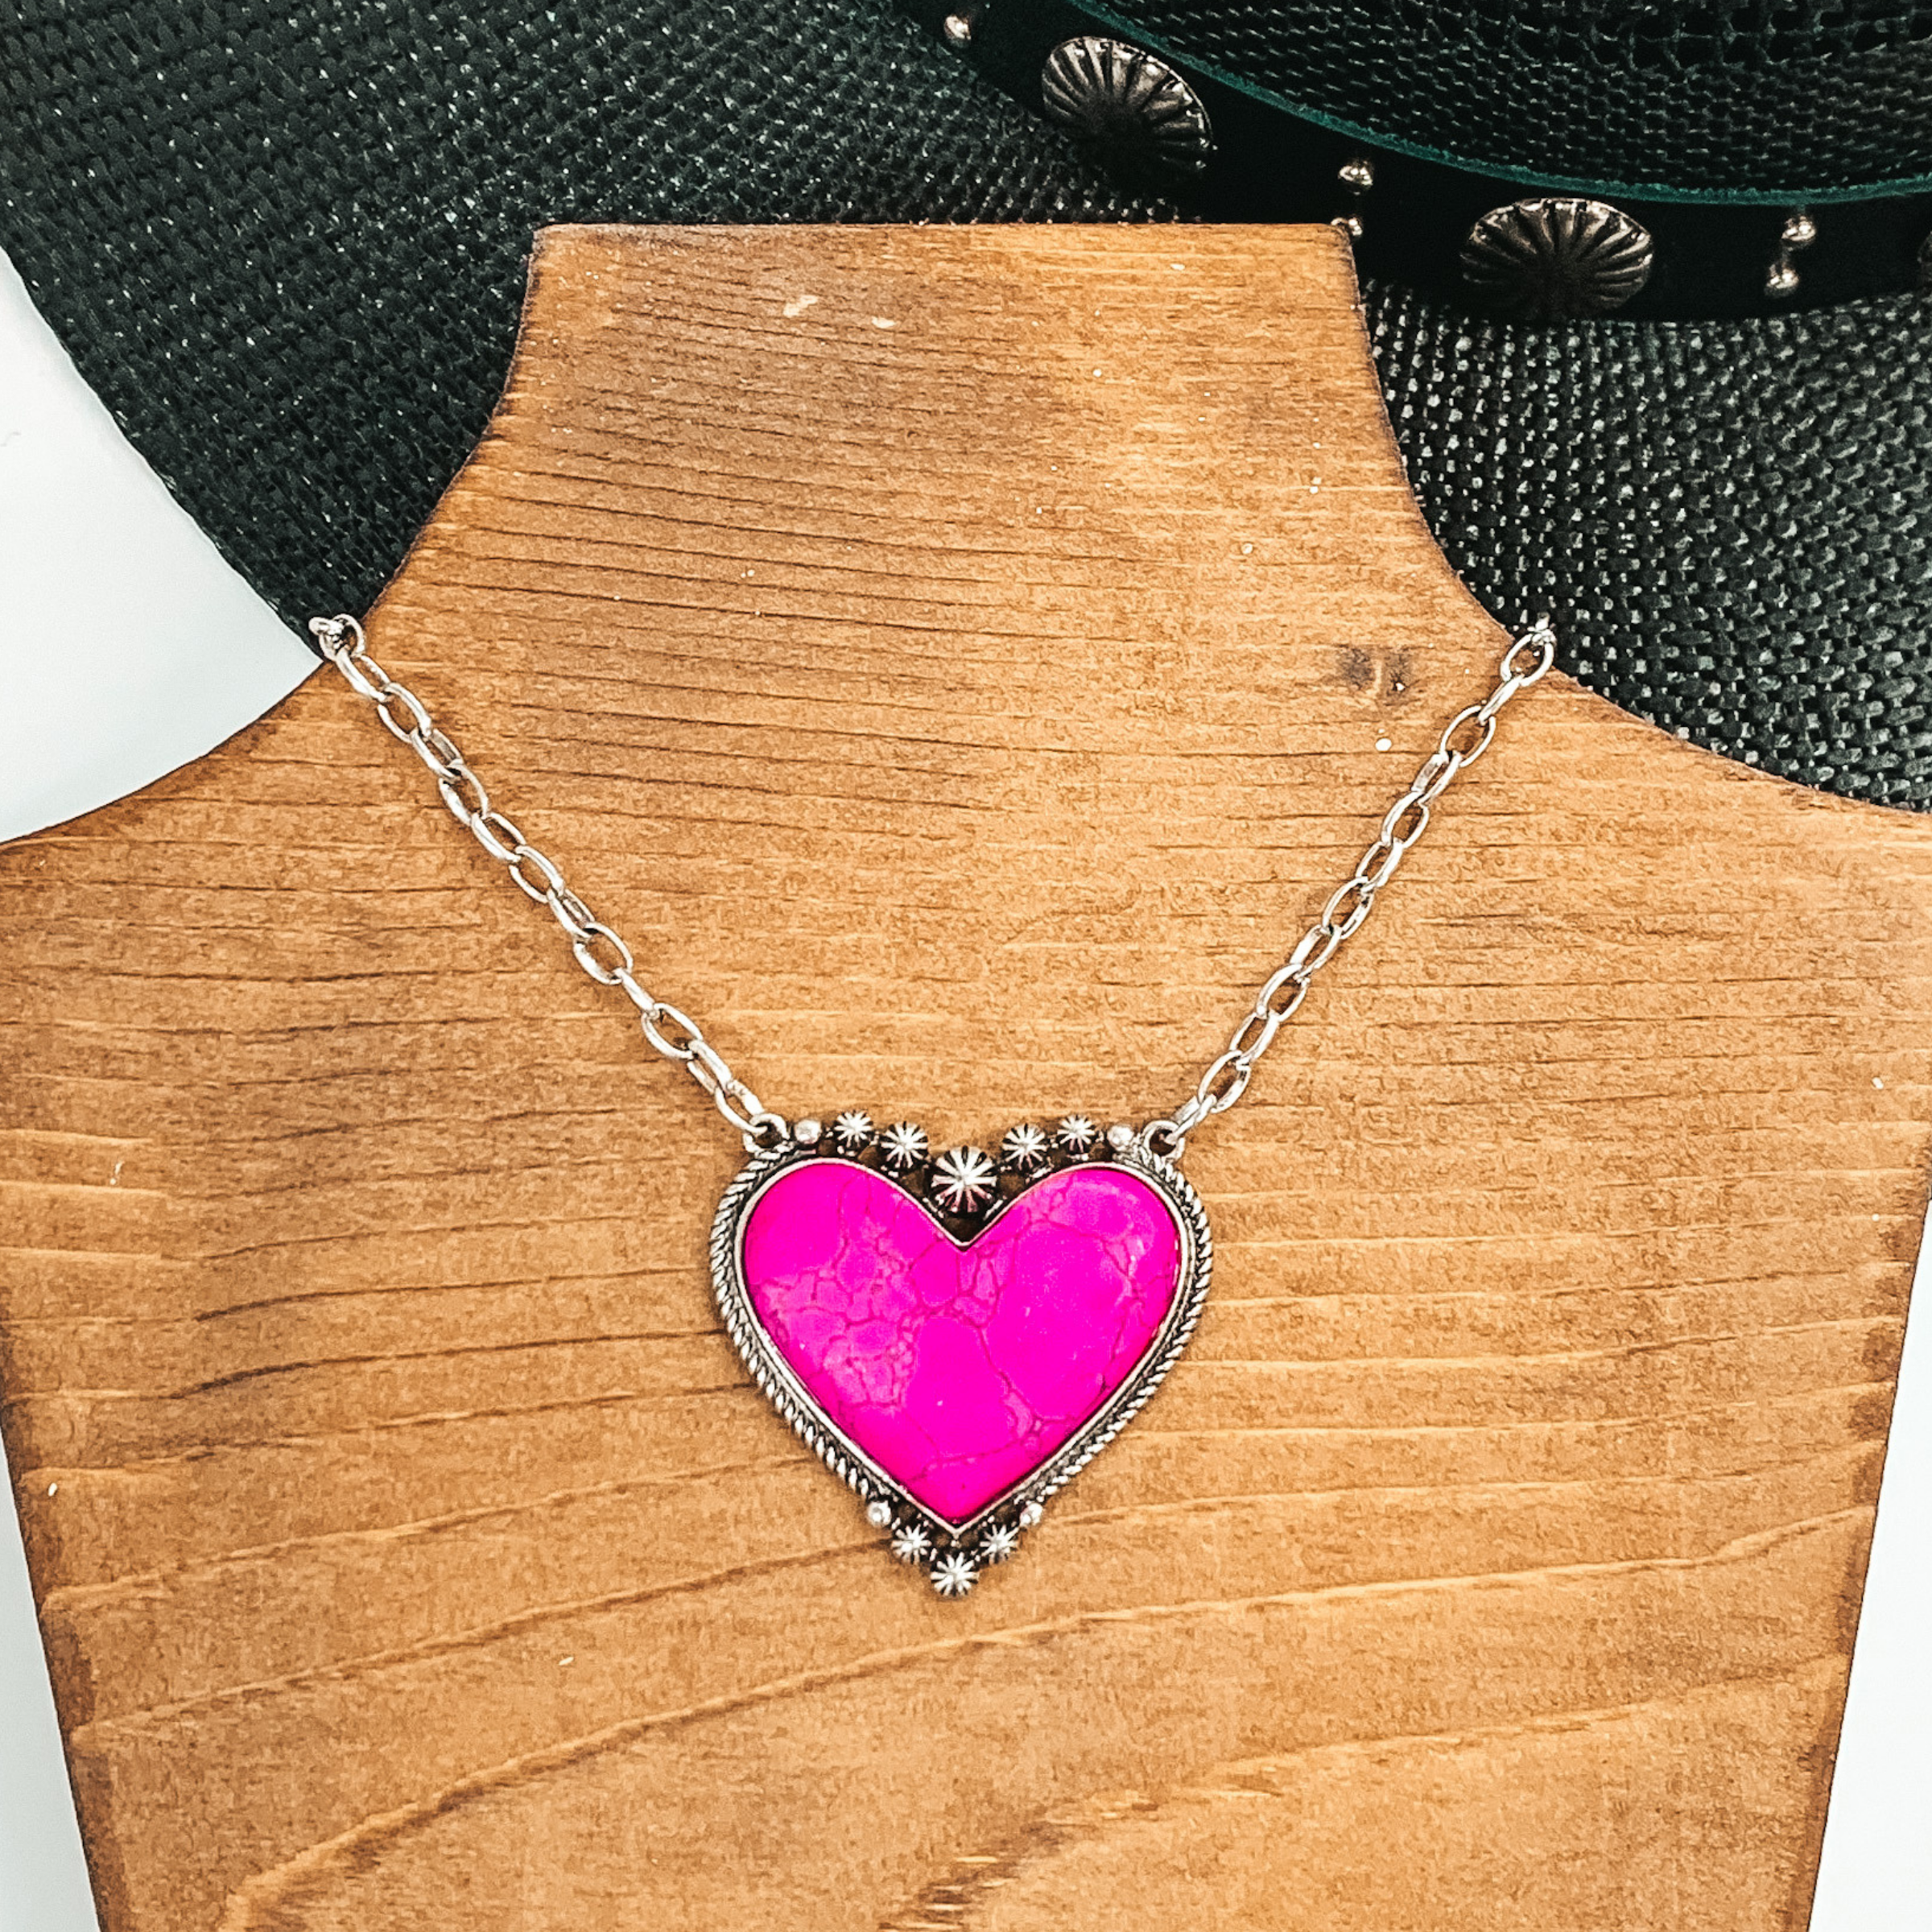 Silver chained necklace with a large pink, heart shaped stone pendant. This necklace is pictured laying on a brown necklace holder on a white and black background.